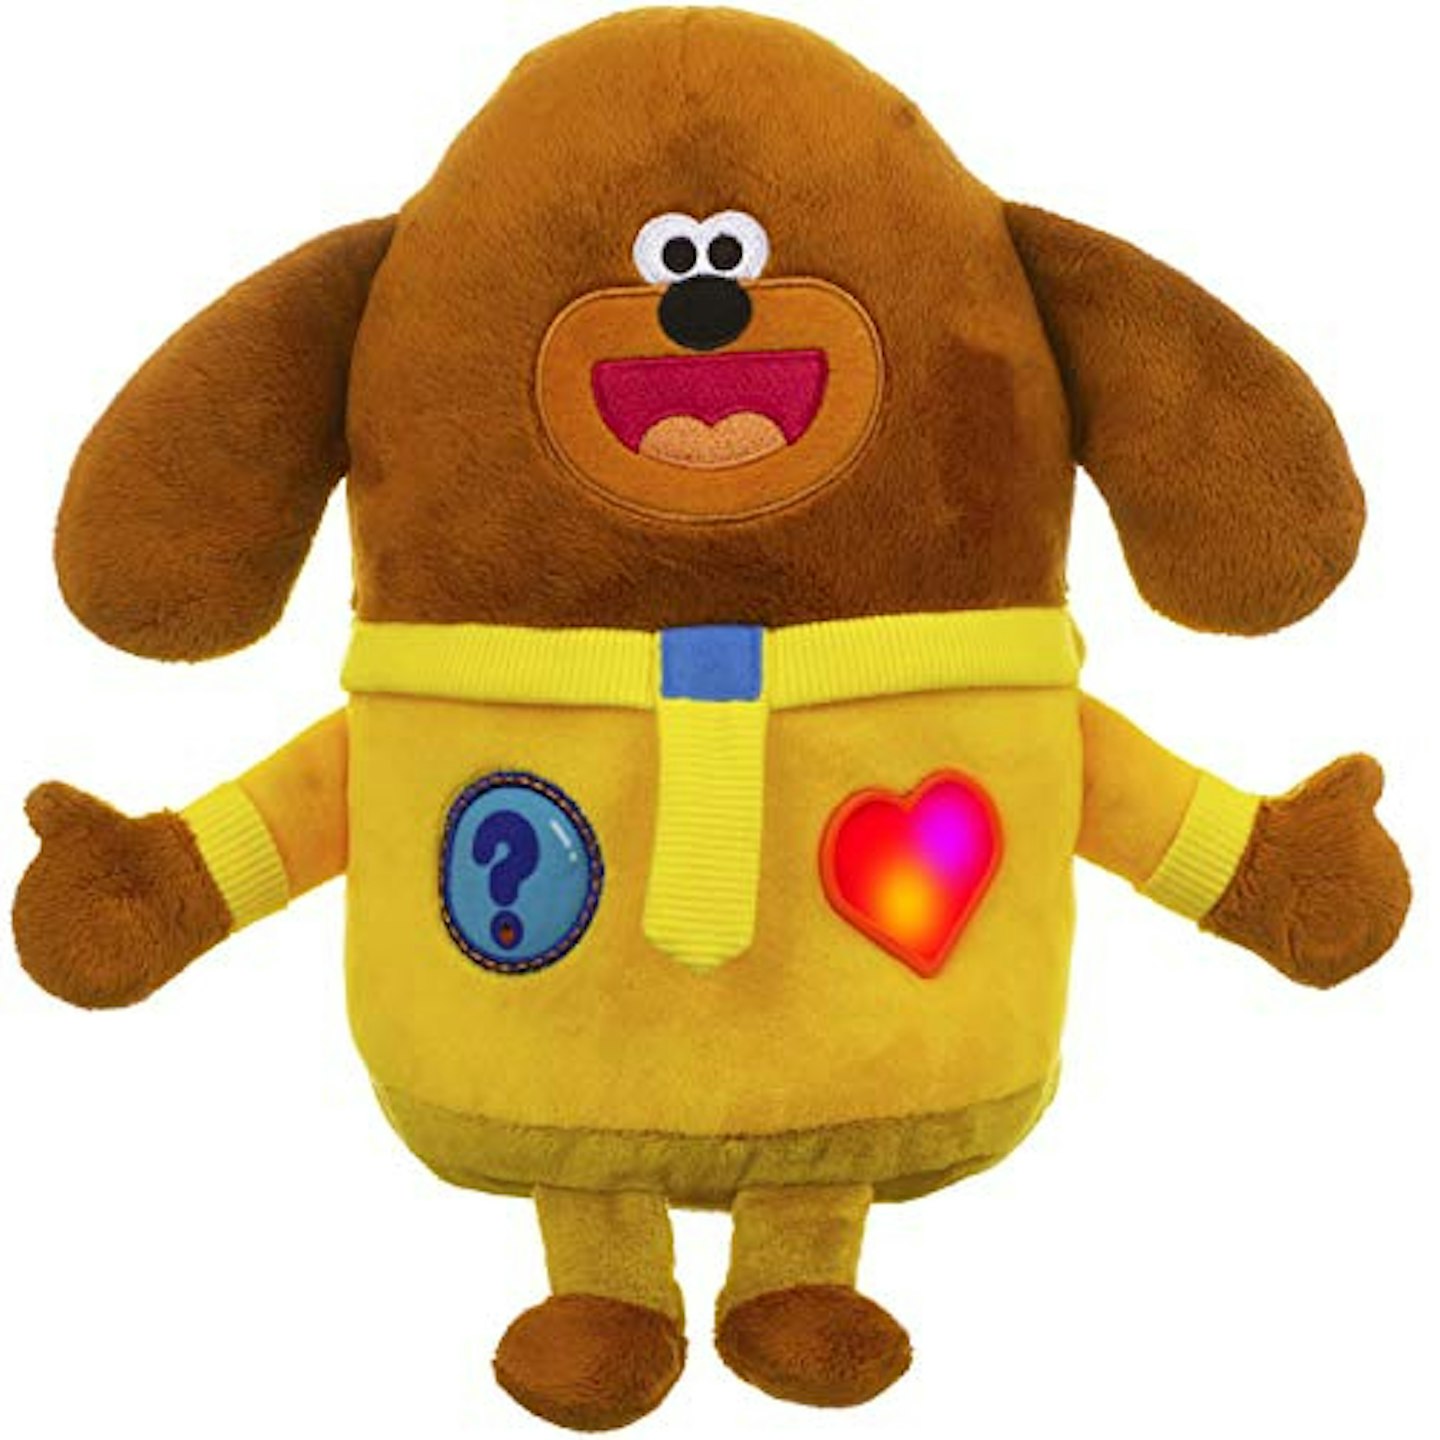 Hey Duggee Interactive Smart Soft Toy